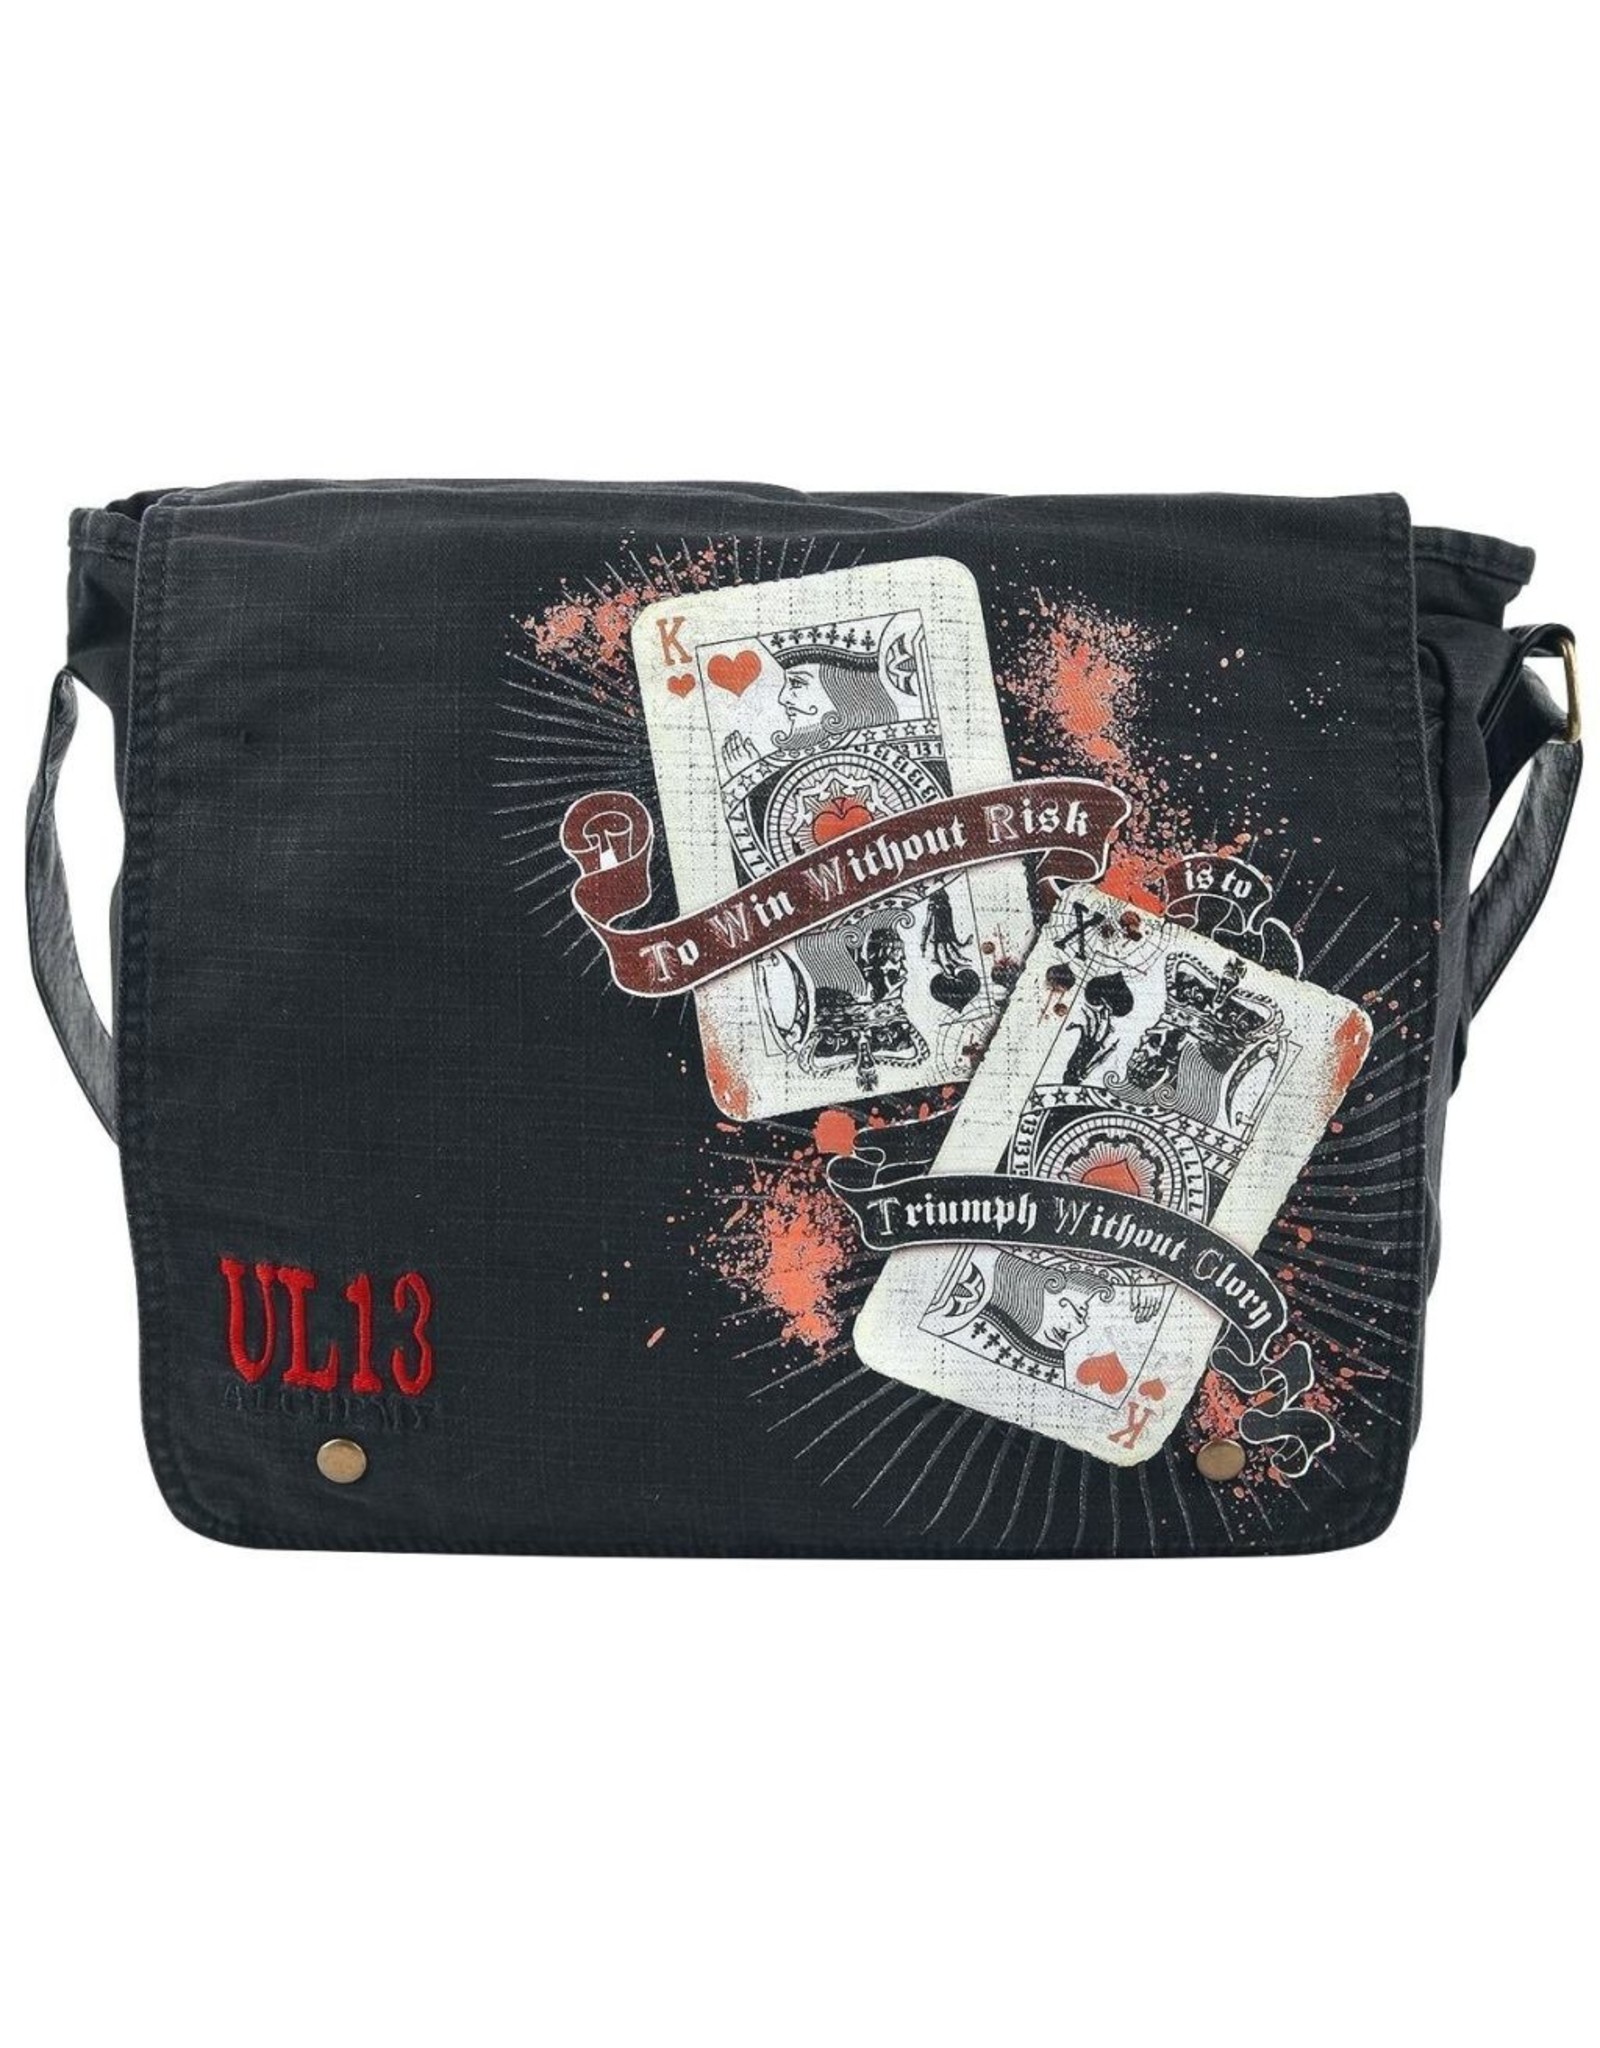 Alchemy Merchandise bags - Alchemy messenger bag To Win Without Risk